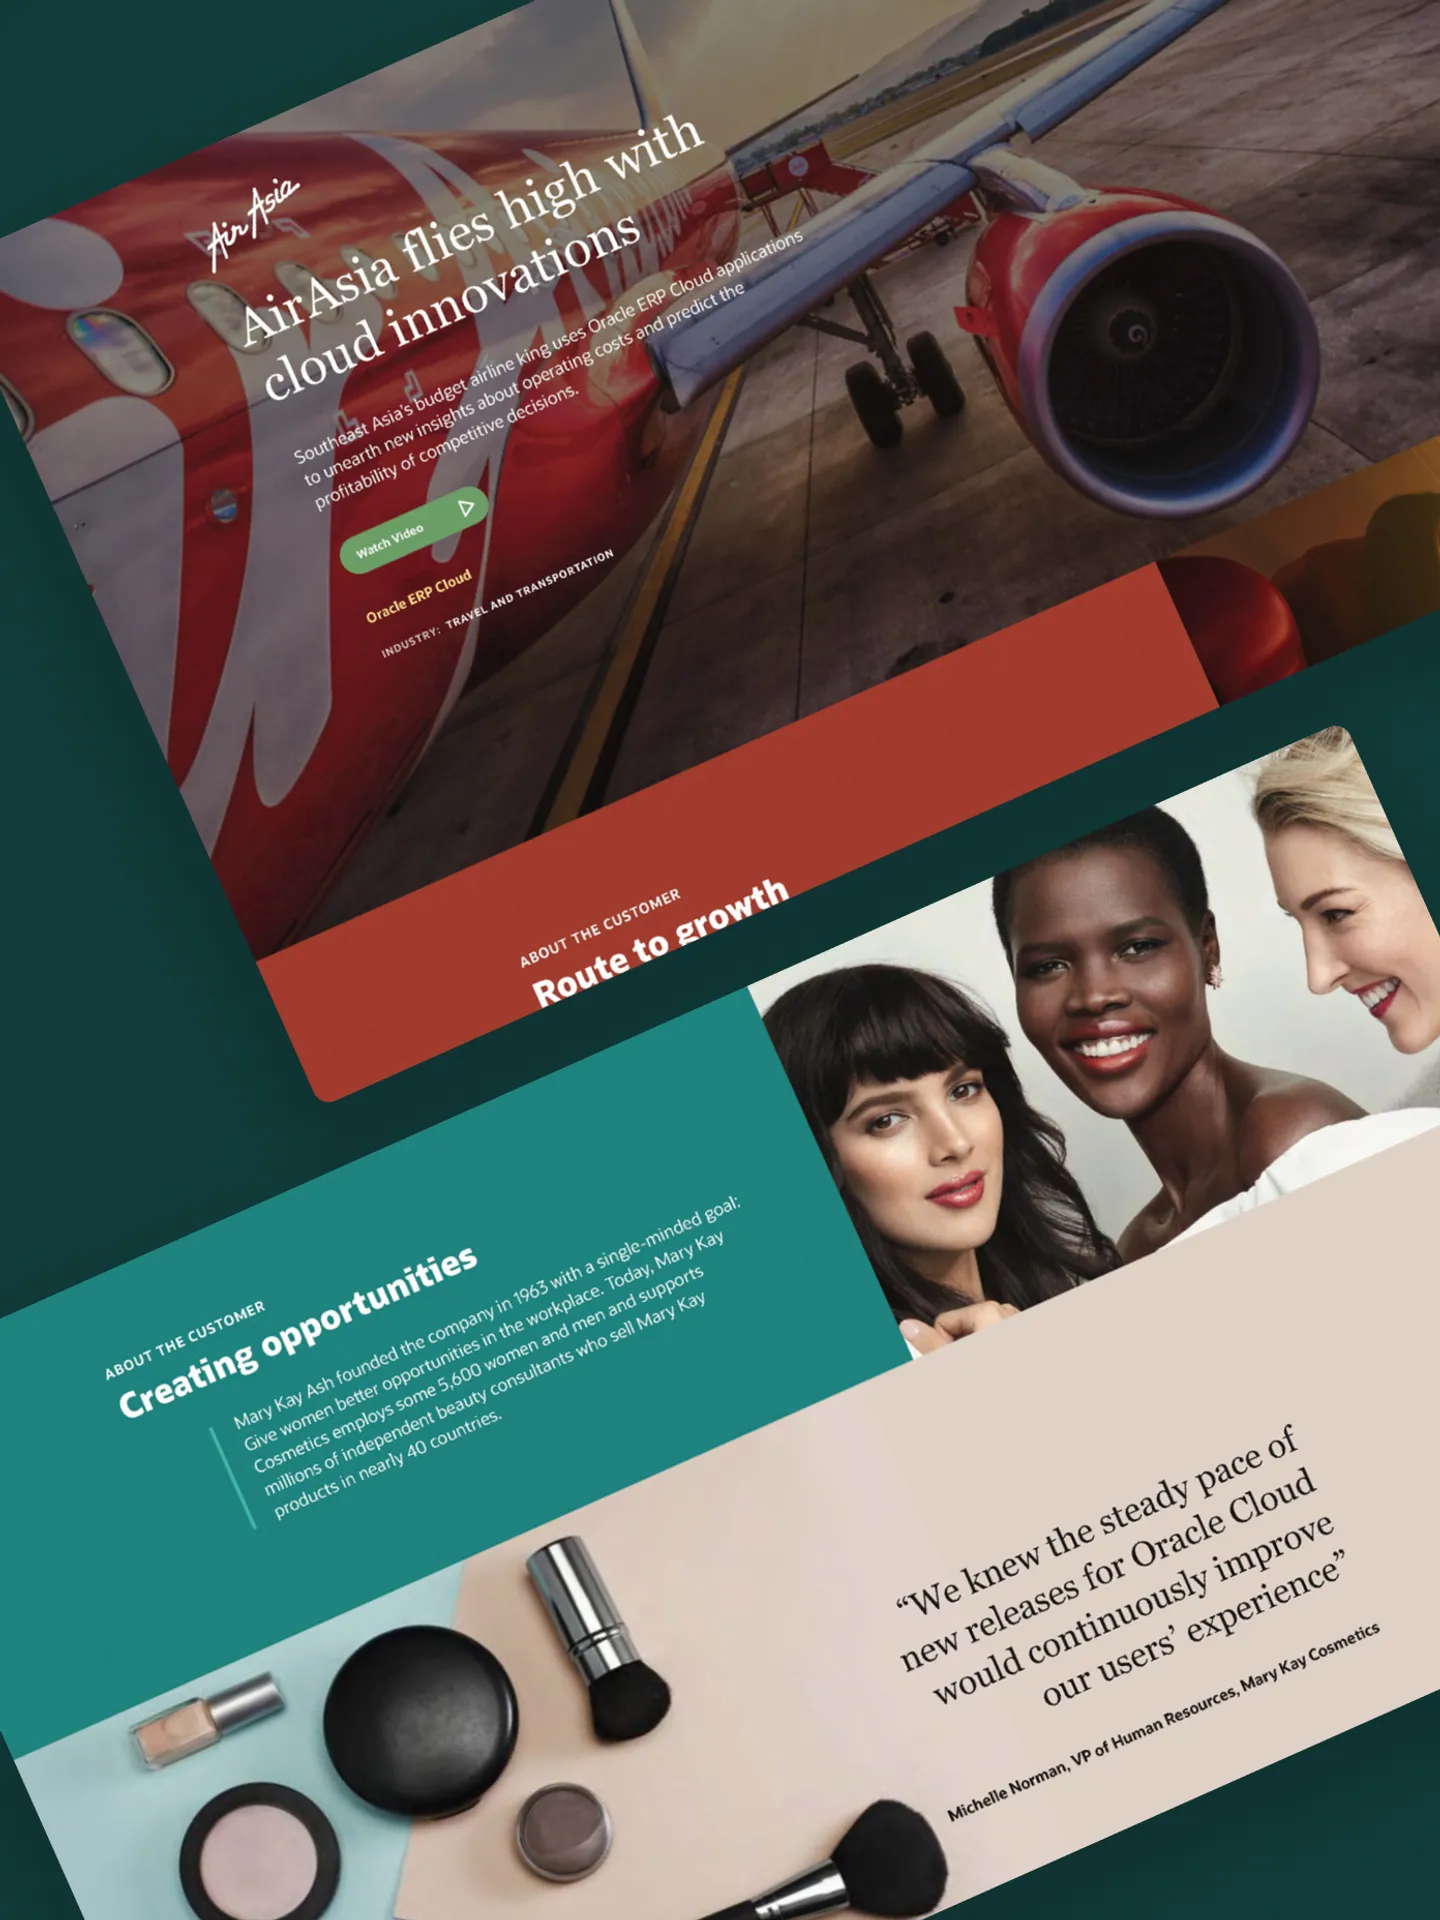 Composite image showing branded illustrations of patterns and colors on web page designs